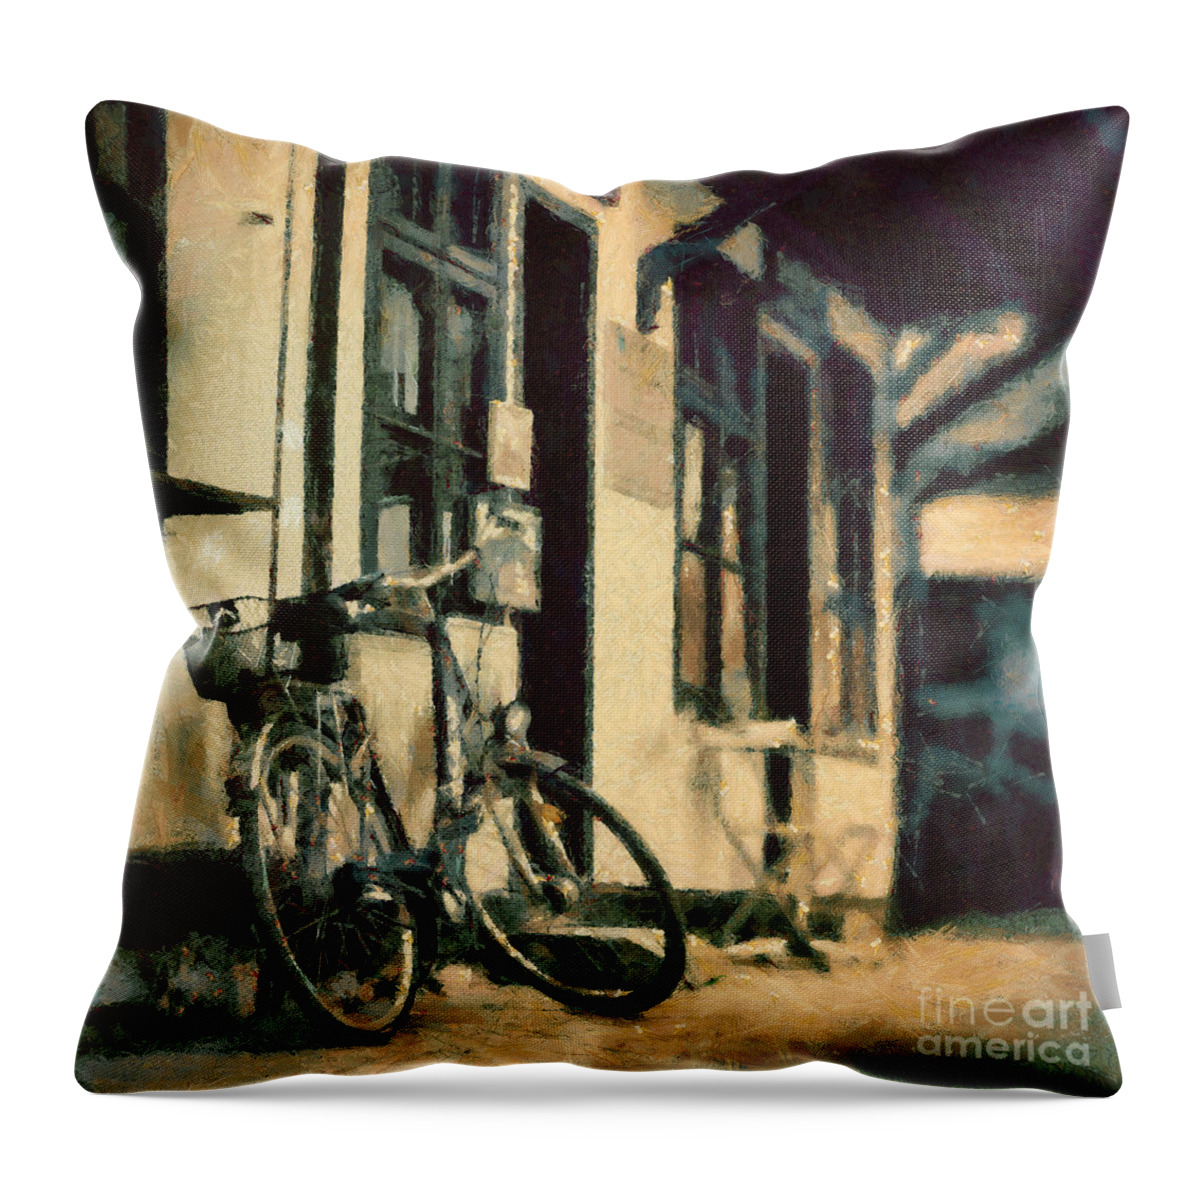 Painting Throw Pillow featuring the painting Bicycle by Dimitar Hristov